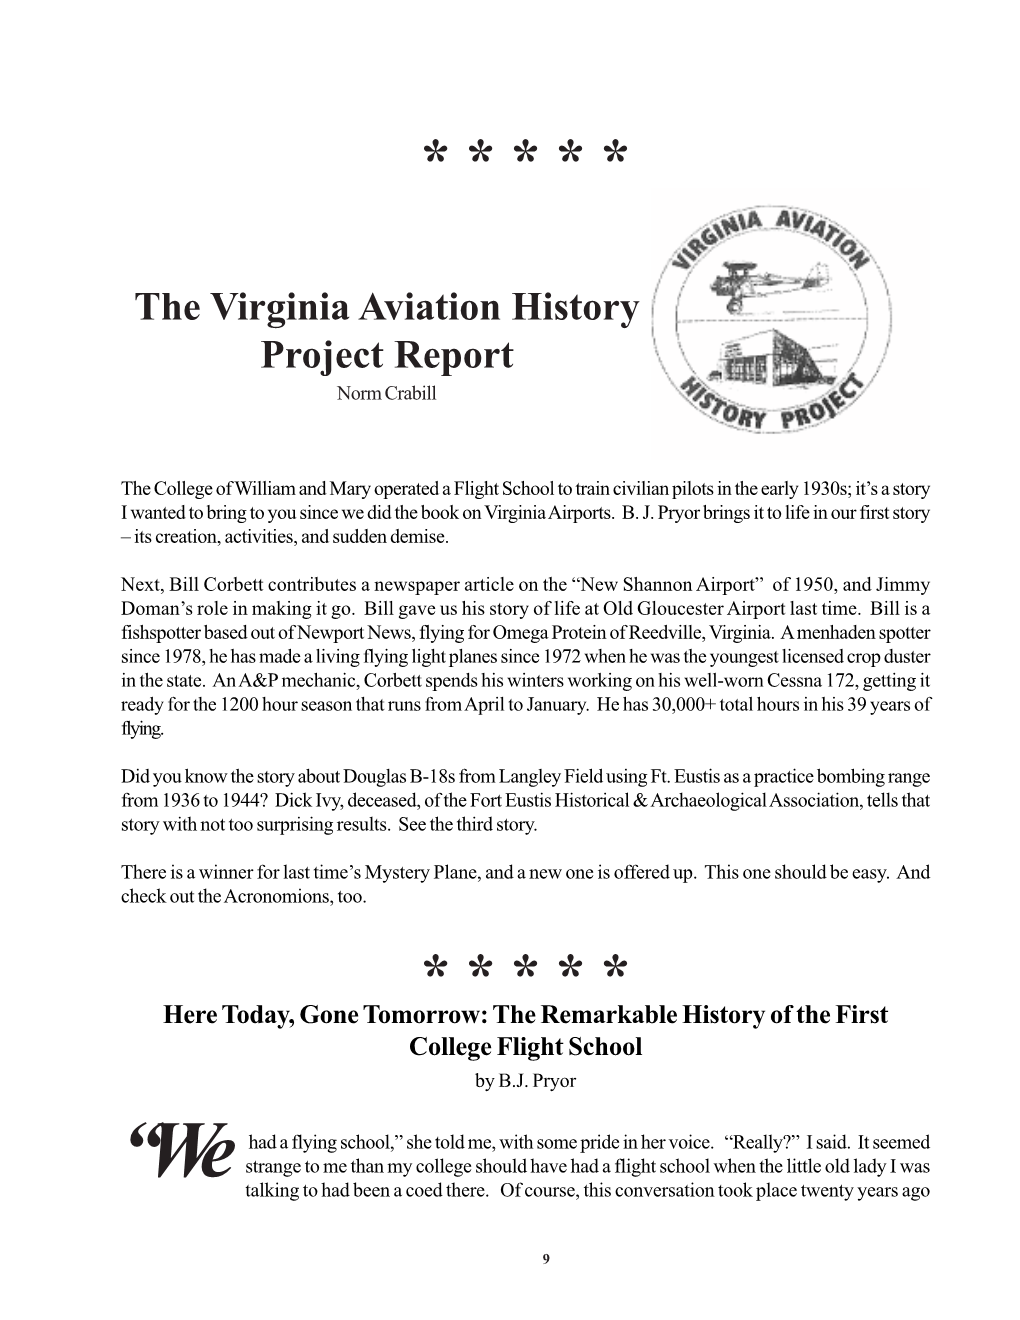 The Remarkable History of the First College Flight School by B.J